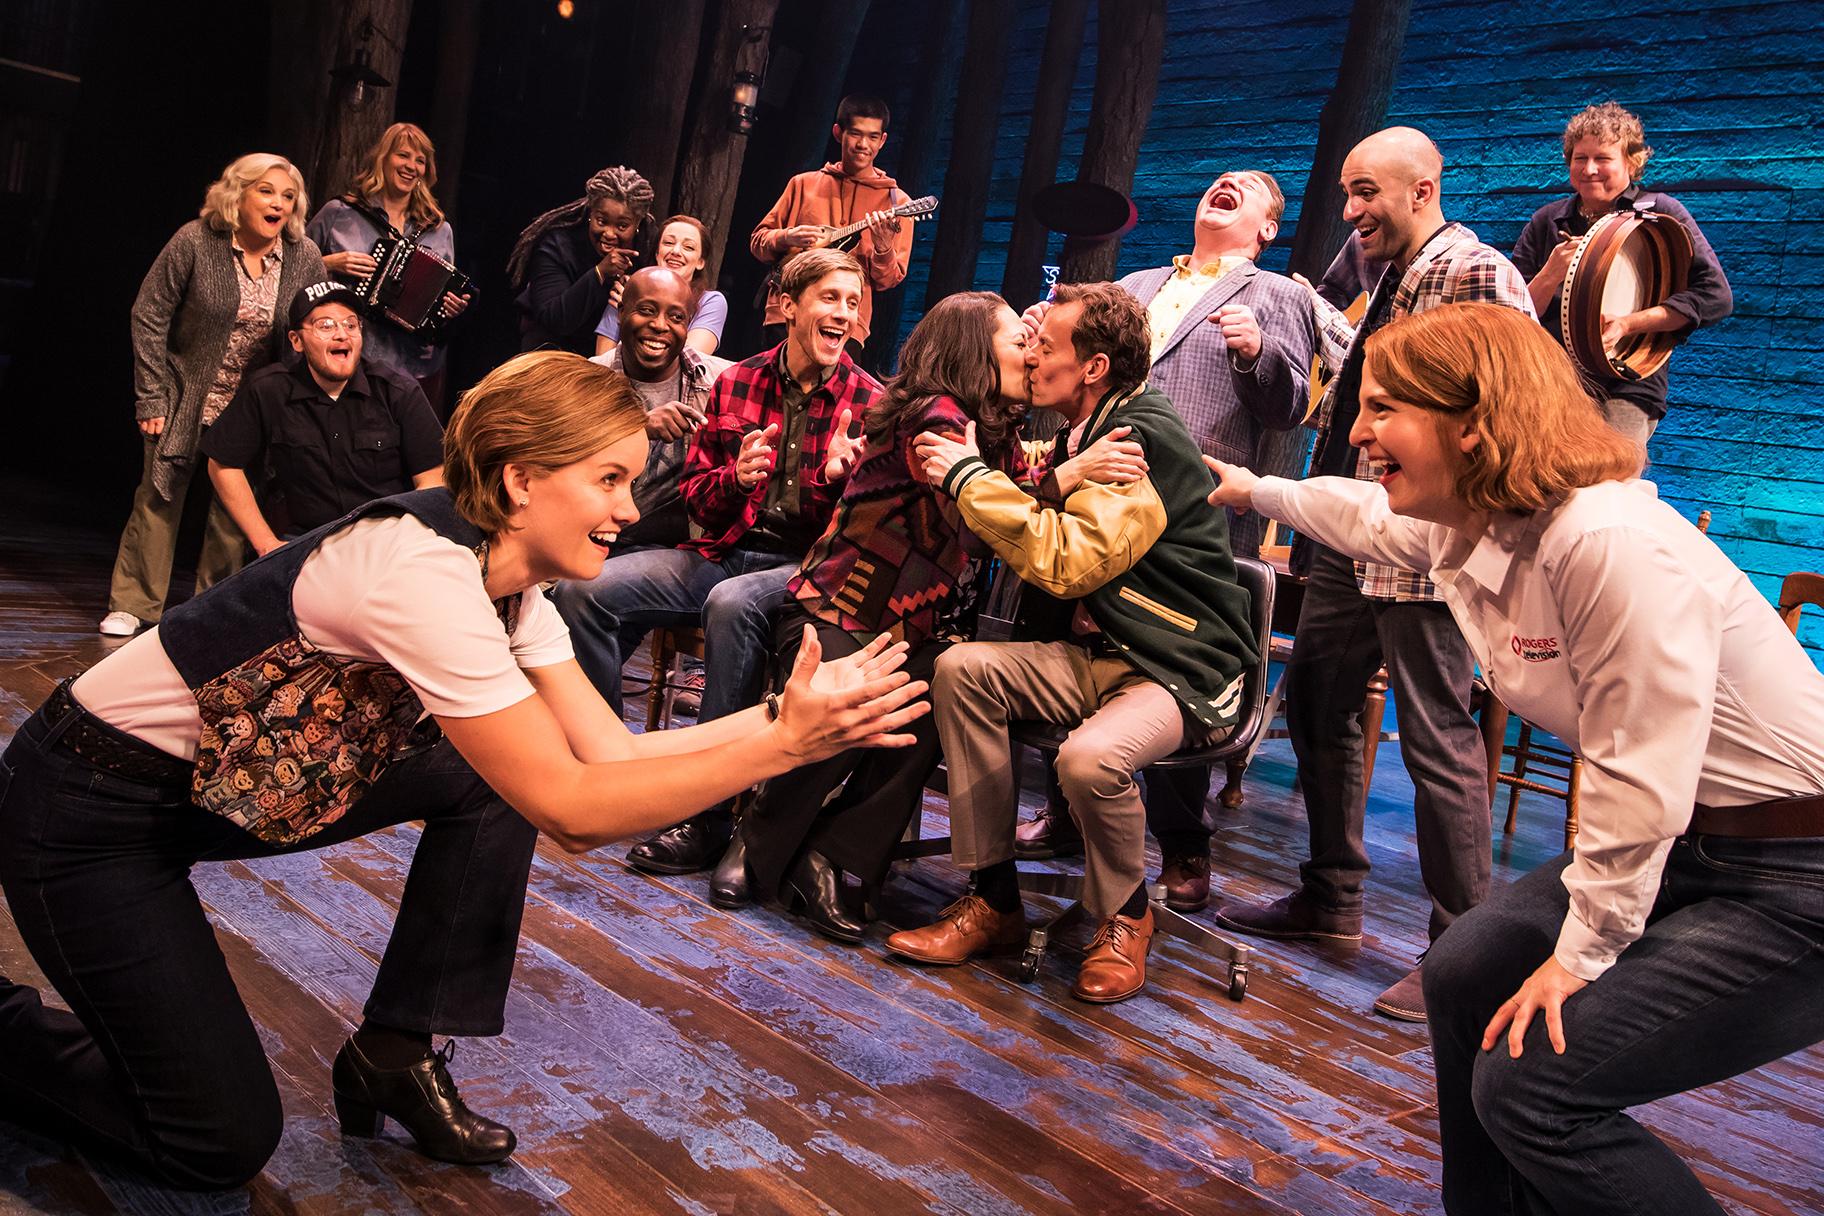 Hit Broadway musical “Come From Away” runs through Aug. 18 at the Cadillac Palace Theatre. (Photo Credit: Matthew Murphy)